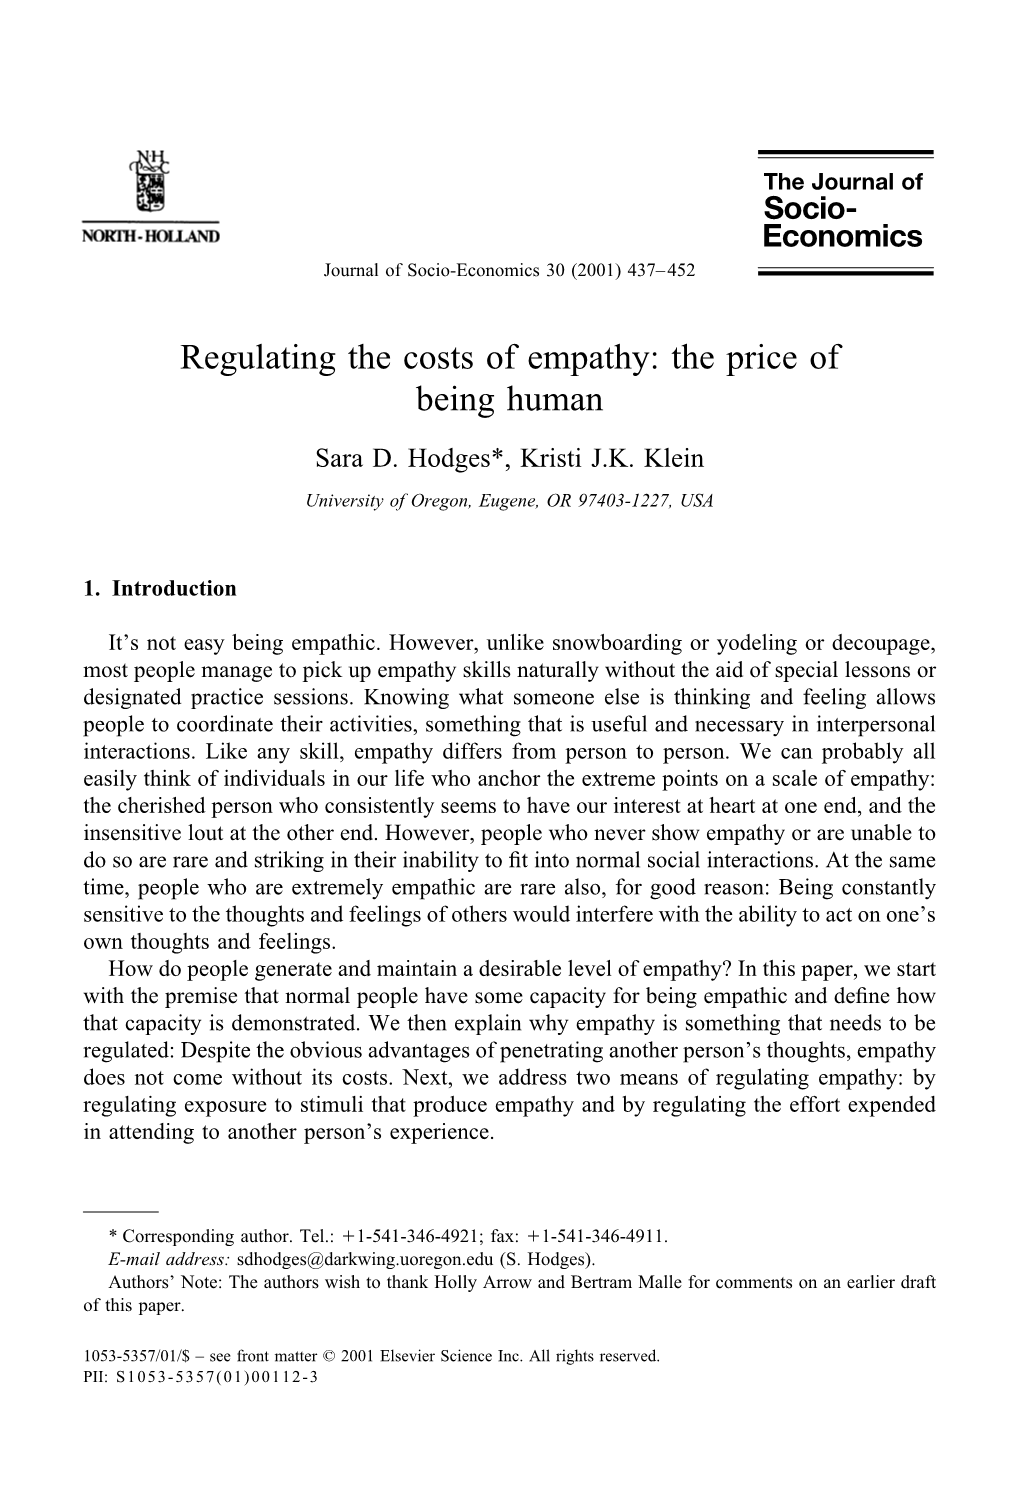 Regulating the Costs of Empathy: the Price of Being Human